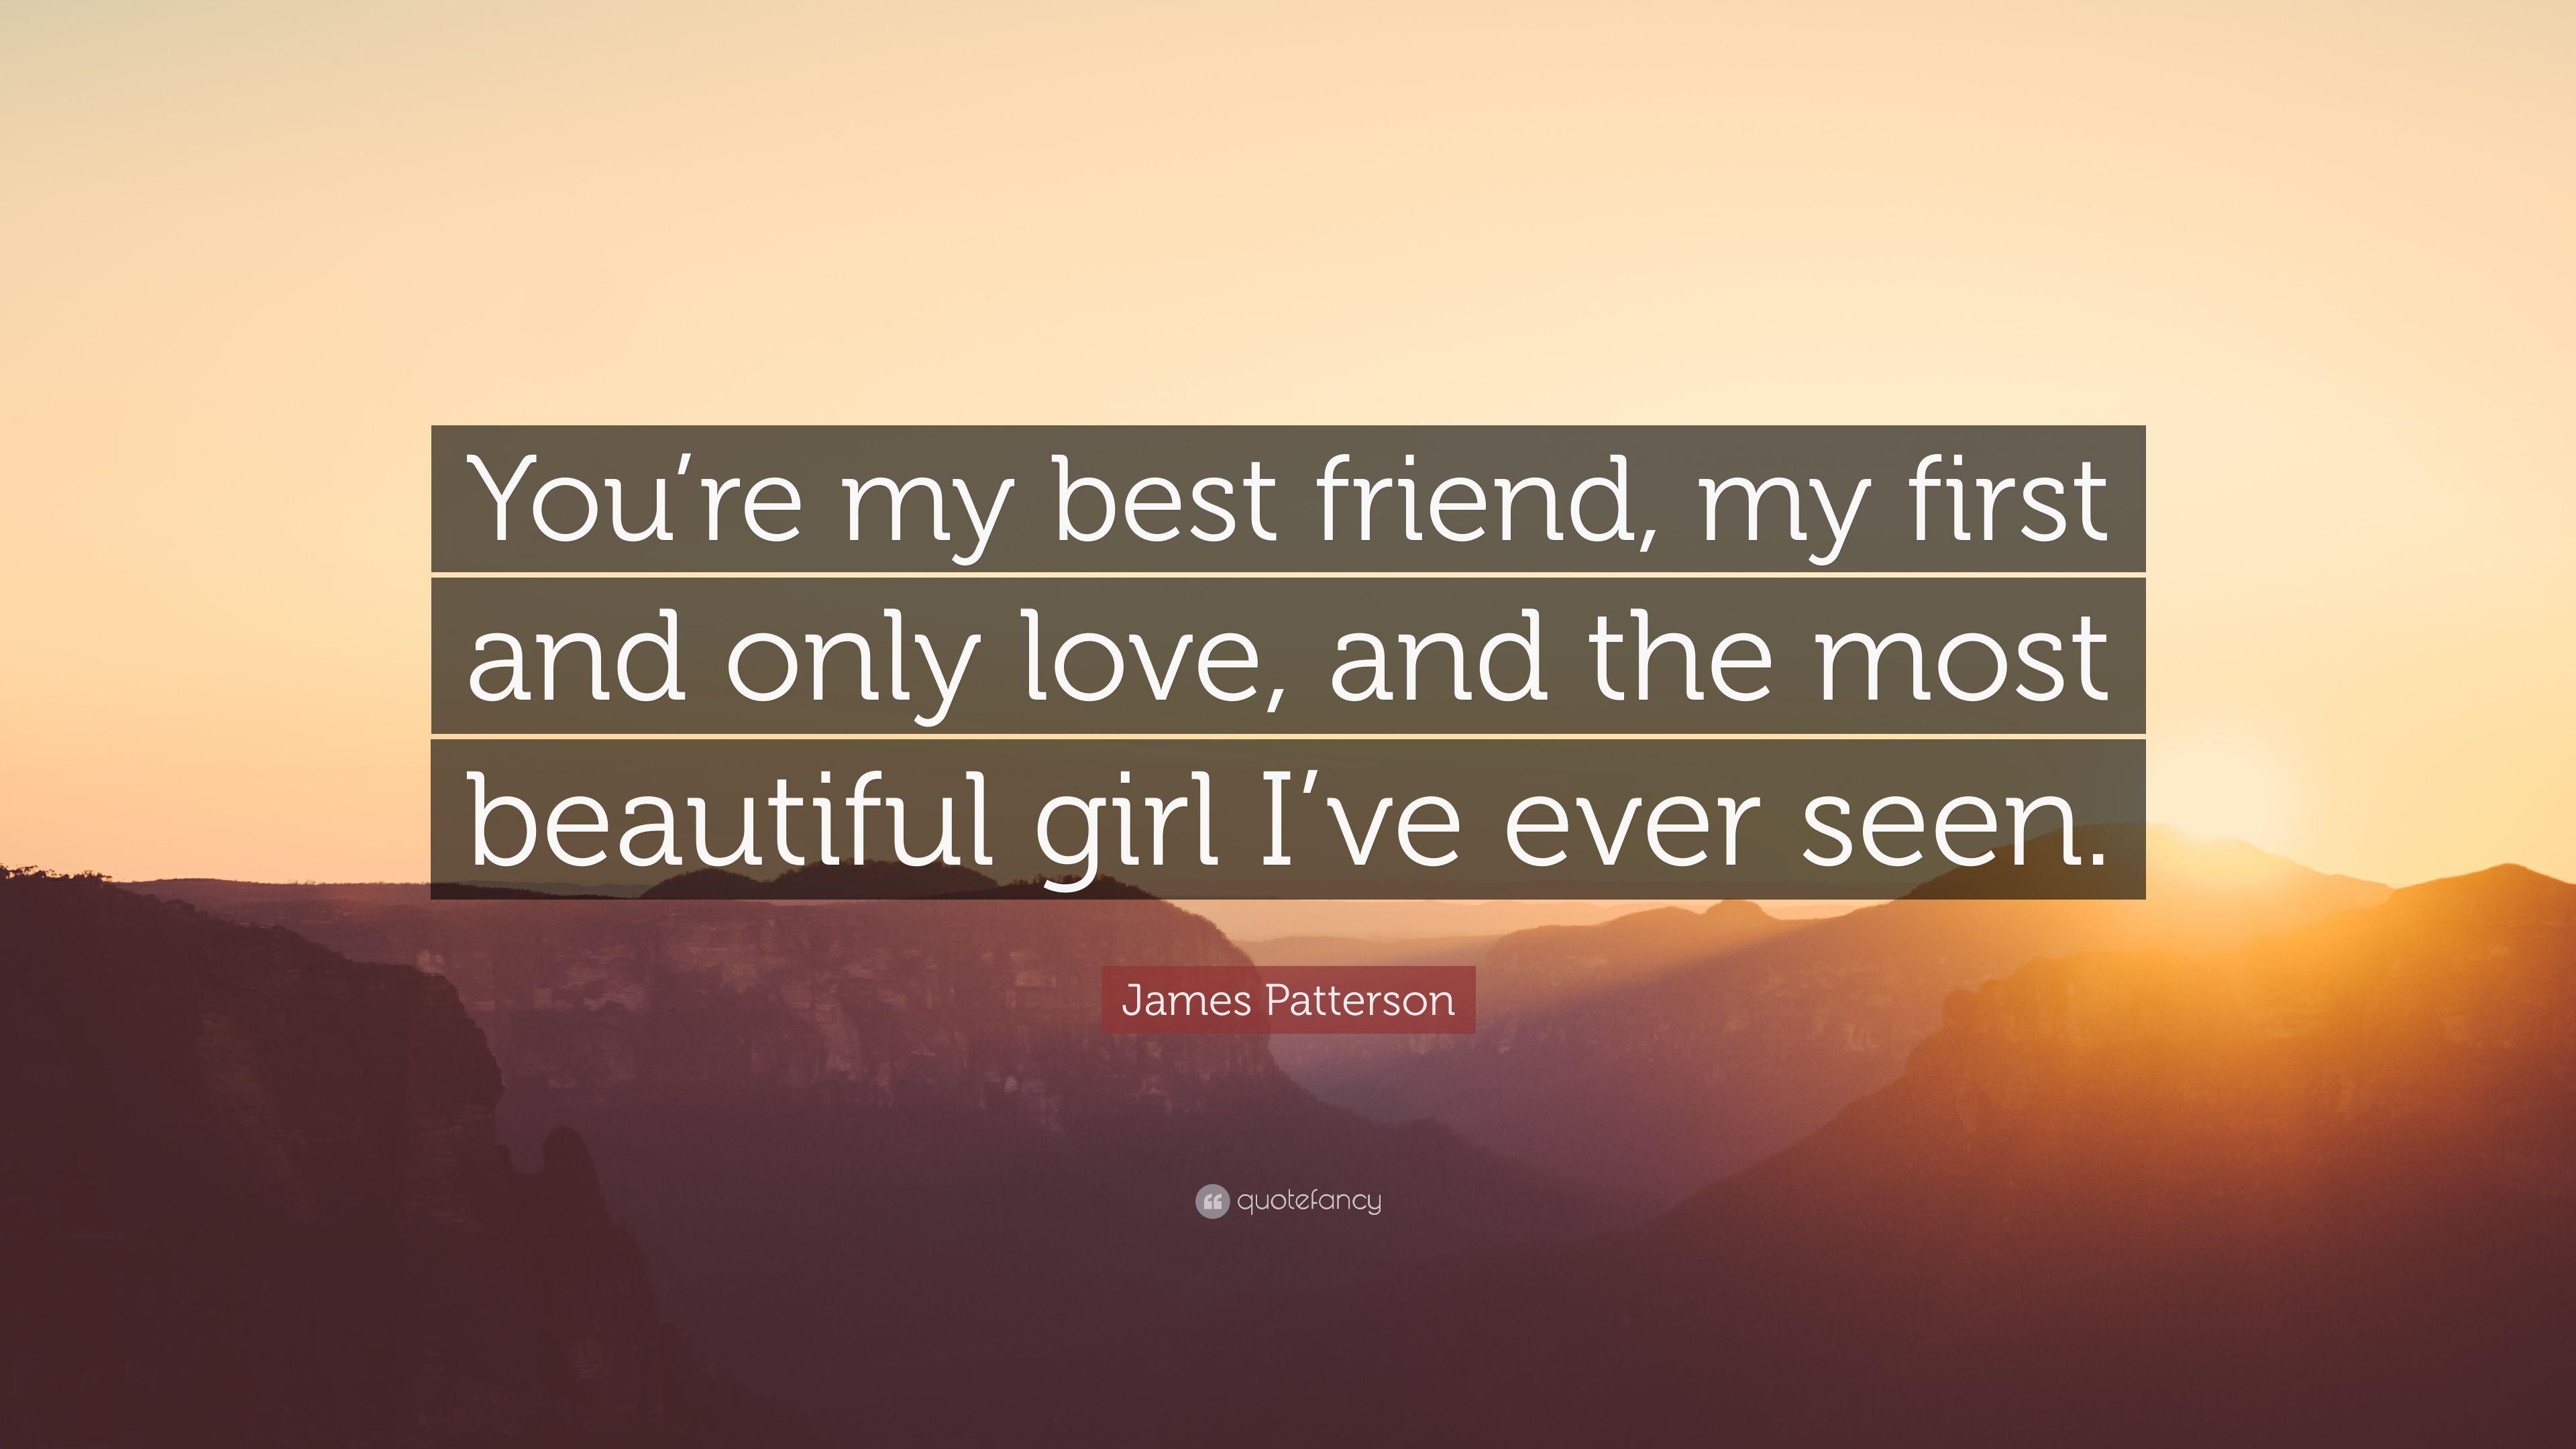 James Patterson Quote: “You're my best friend, my first and only